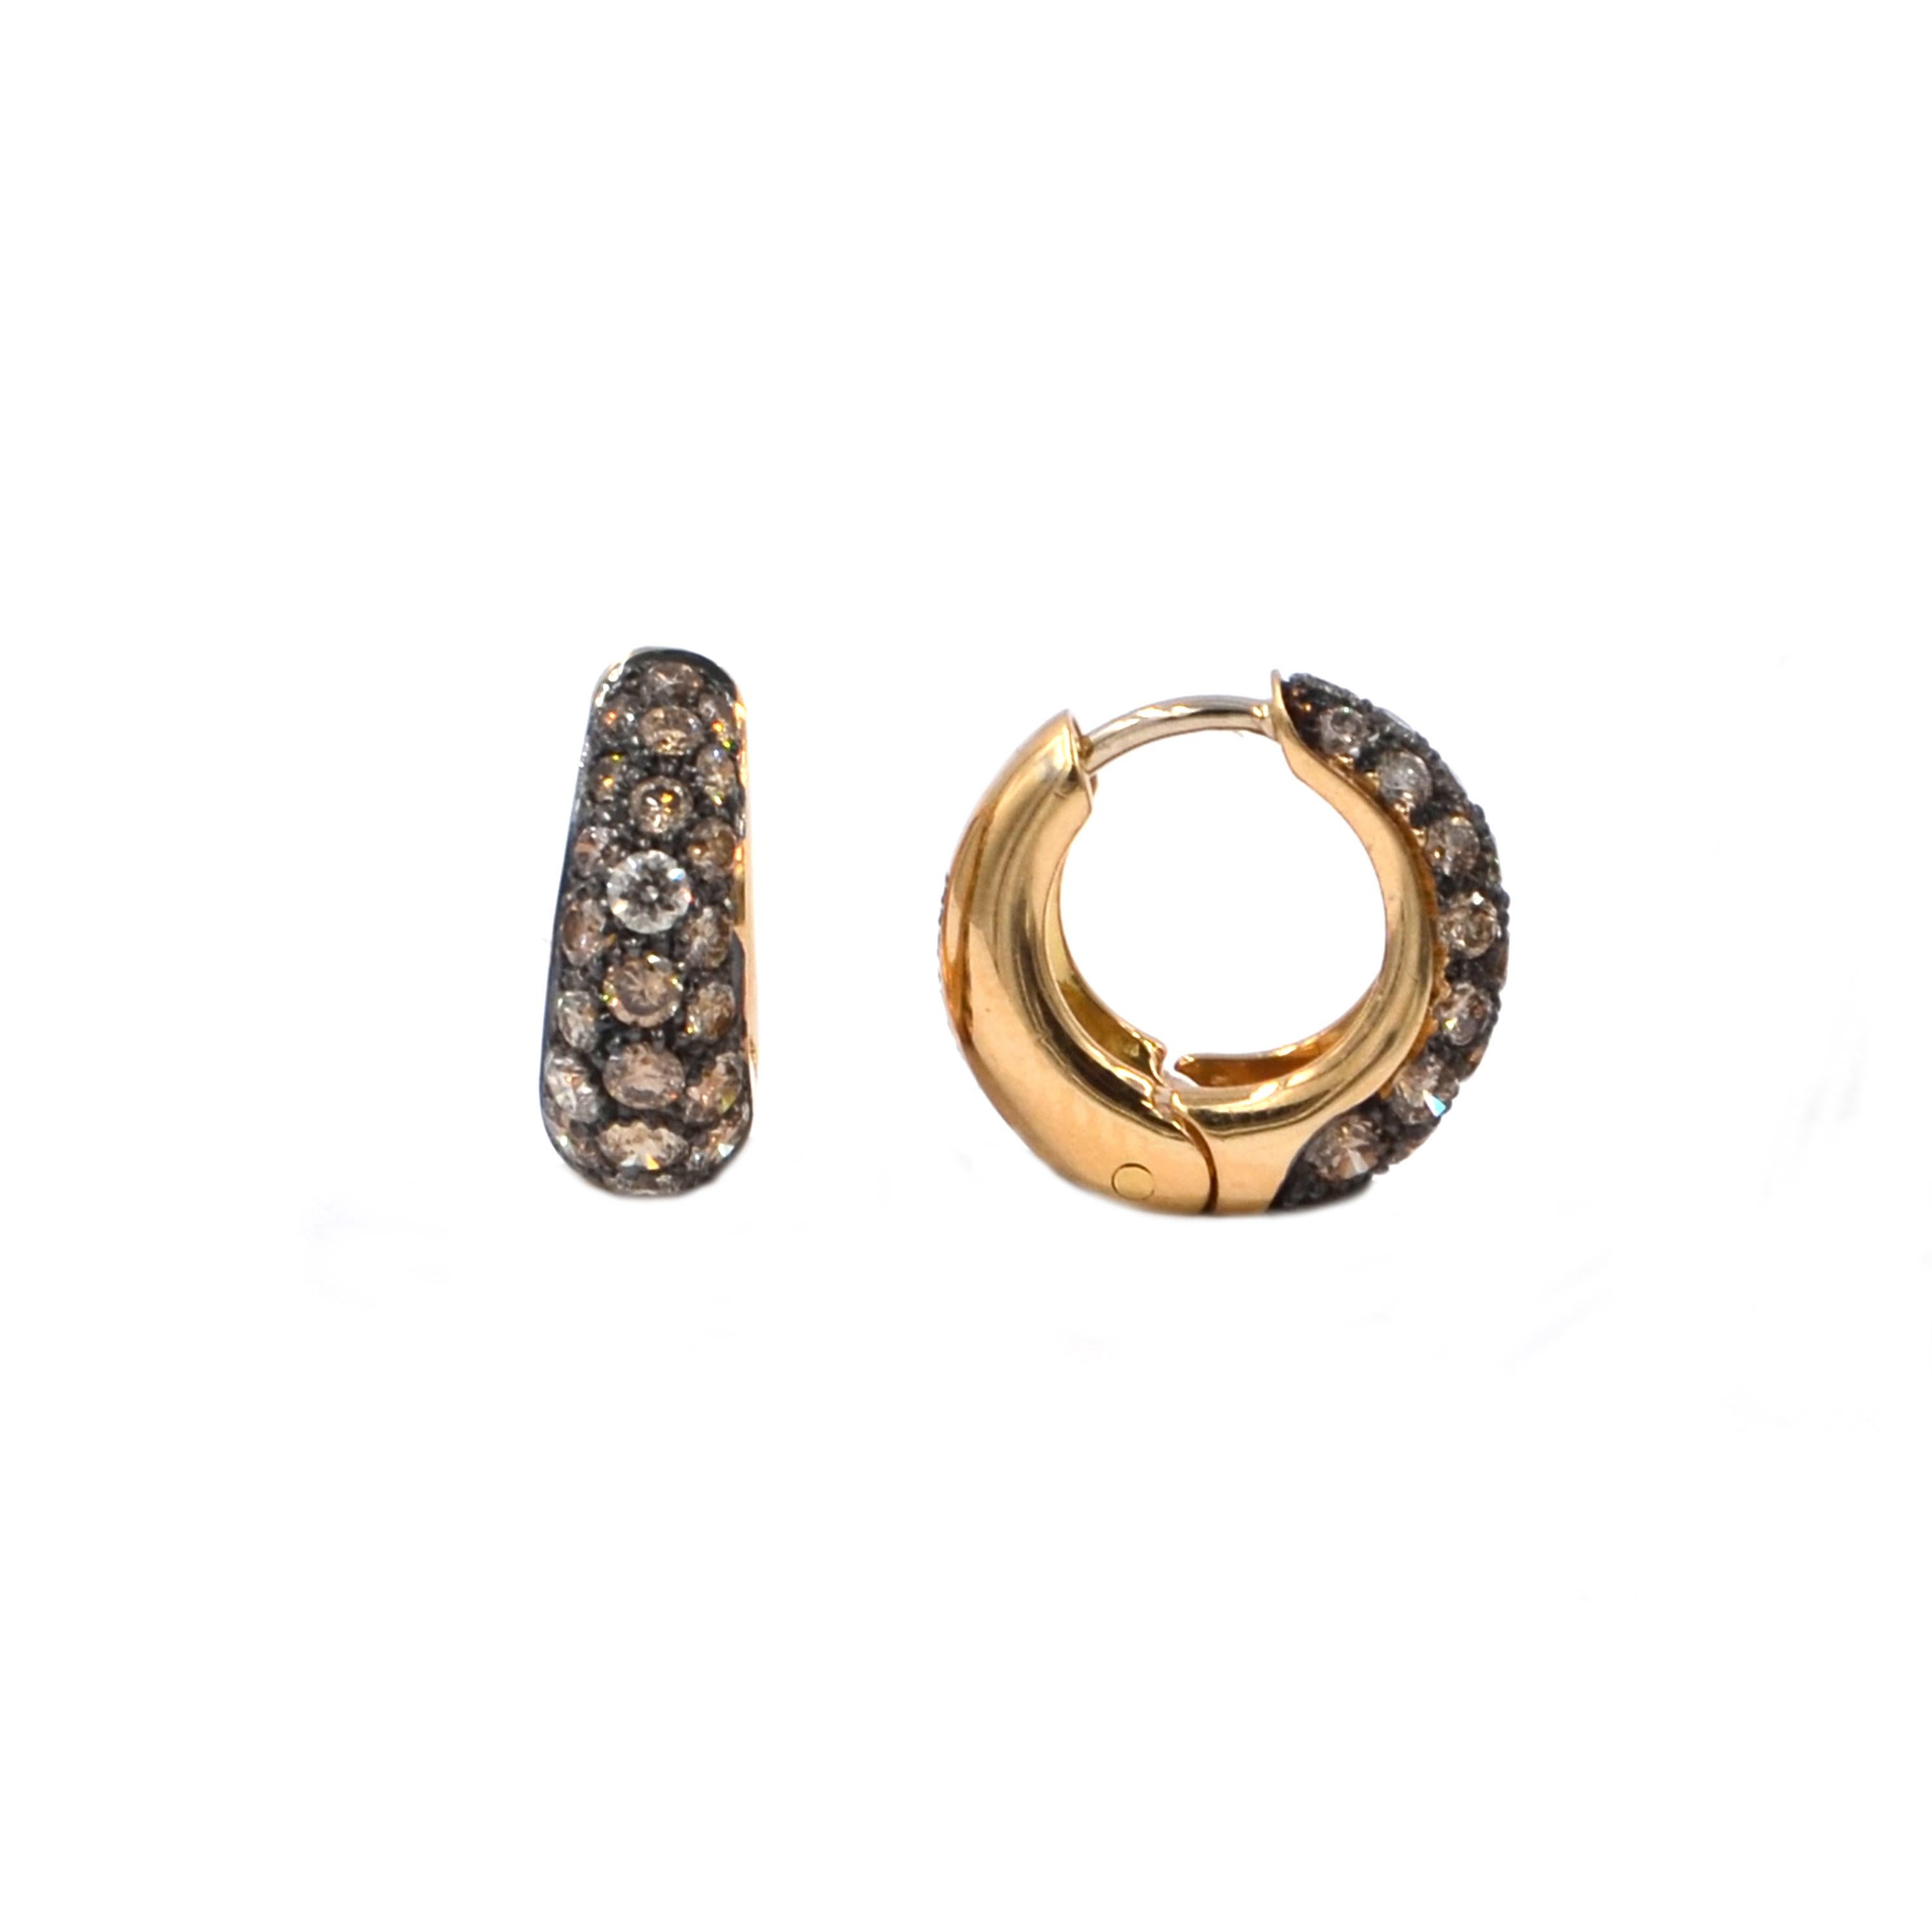 18 Karat Yellow Gold and Brown Diamonds Pavè Garavelli Huggie Earrings
The traditional and classic huggies for every day wearing in a gently graduated shape .
Width mm.5.5 height mm.13.5 internal diameter mm.8
18KT GOLD gr : 6.70
BROWN DIAMONDS ct :